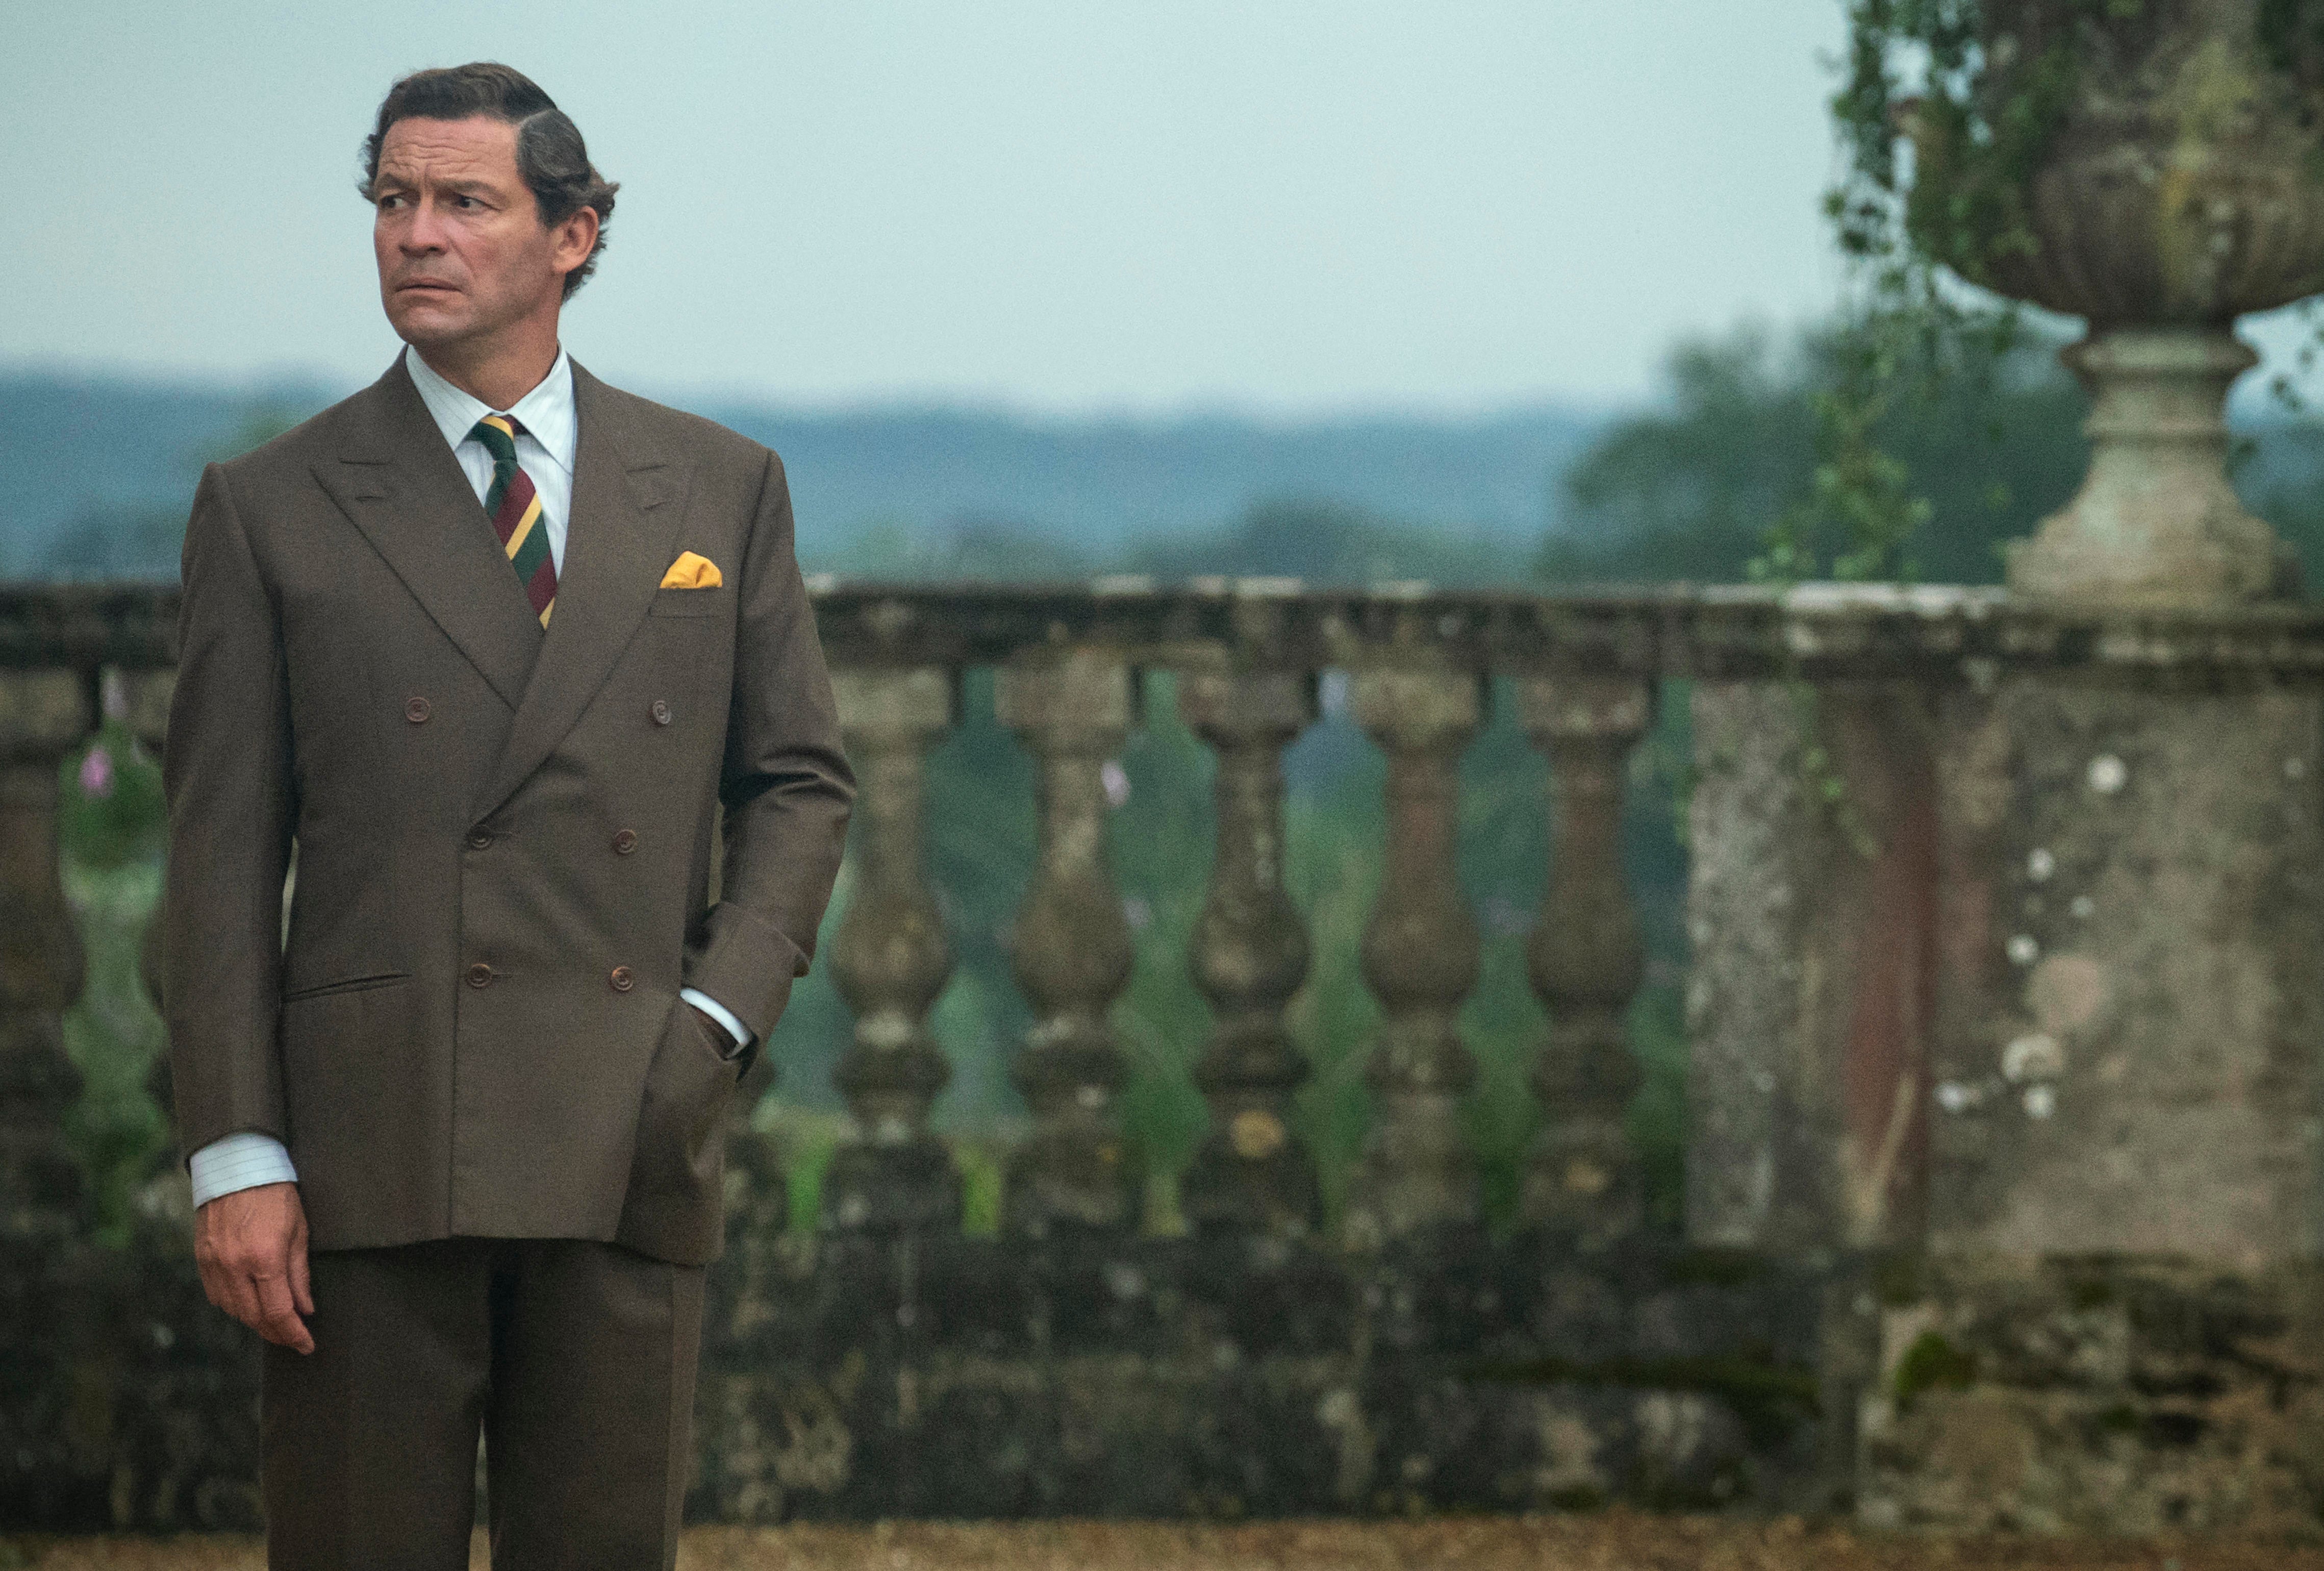 netflix-the-crown-prince-charles-dominic-west.jpg